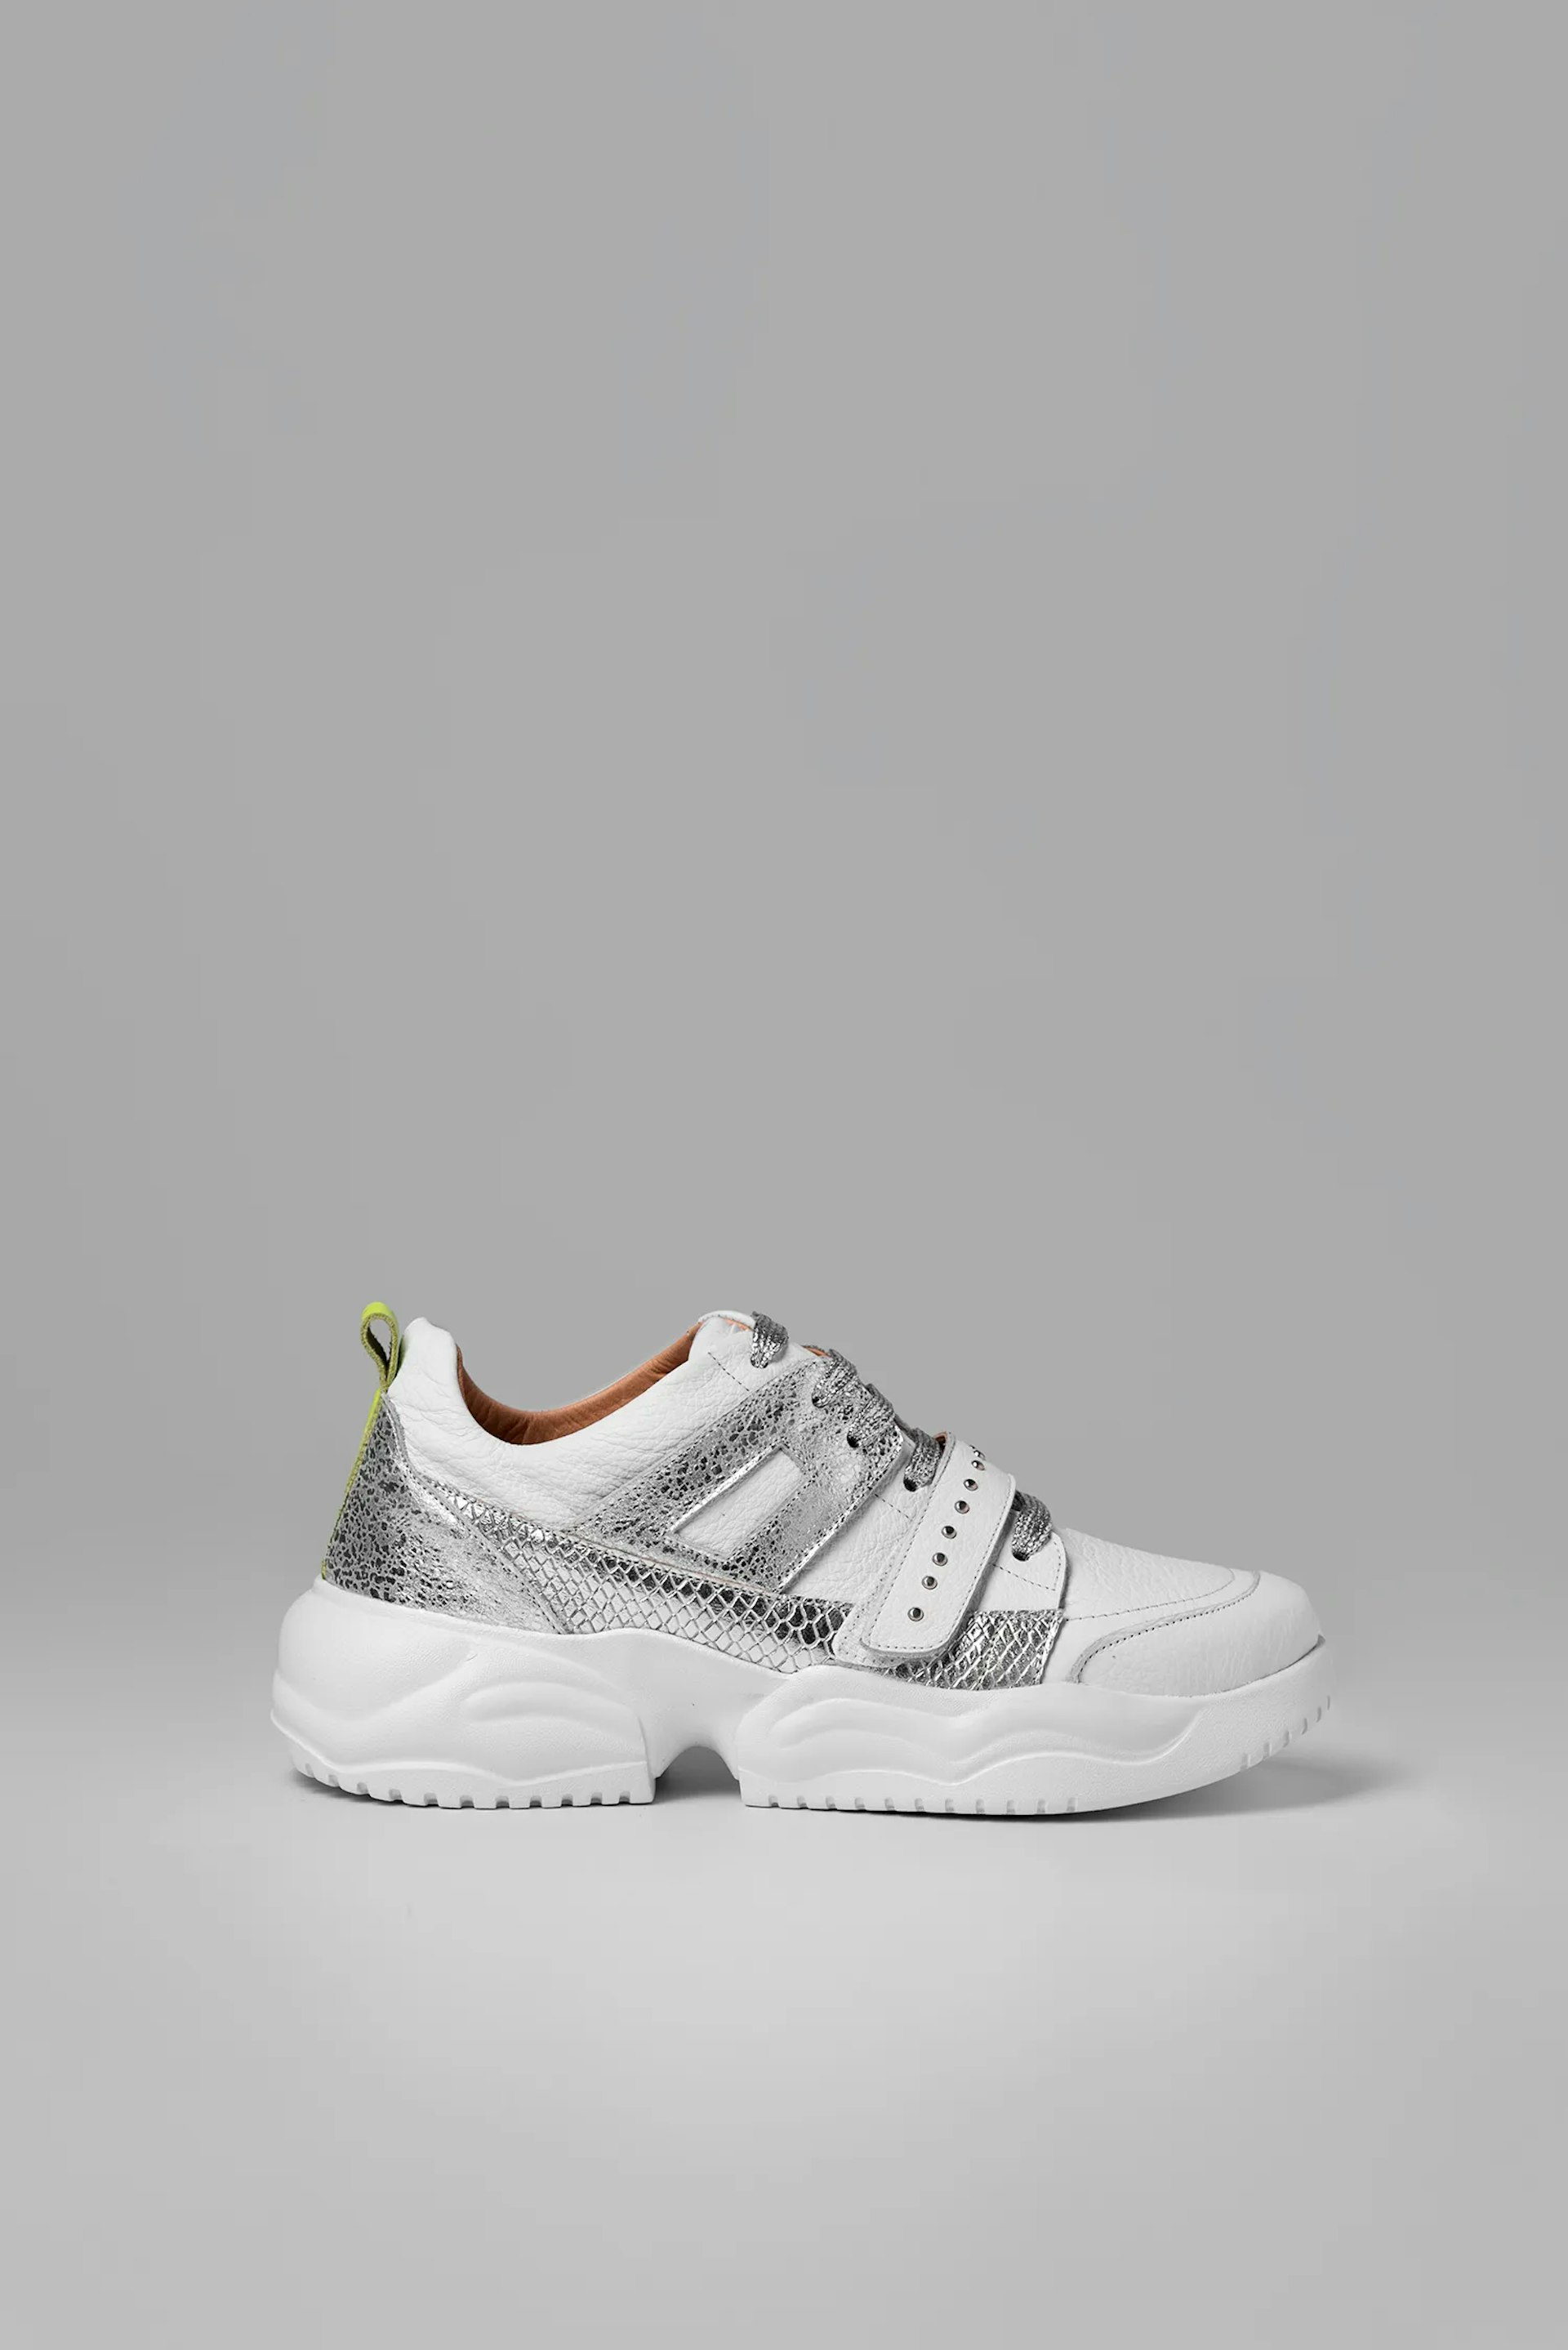 Sneakers Vitti San Rafael. Sneaker in white, made 100% in cowhide leather. Trims and pieces in woven silver leather. DecorativeSneaker in white, made 100% in cowhide leather. Trims and pieces in woven silver leather. Decorative...